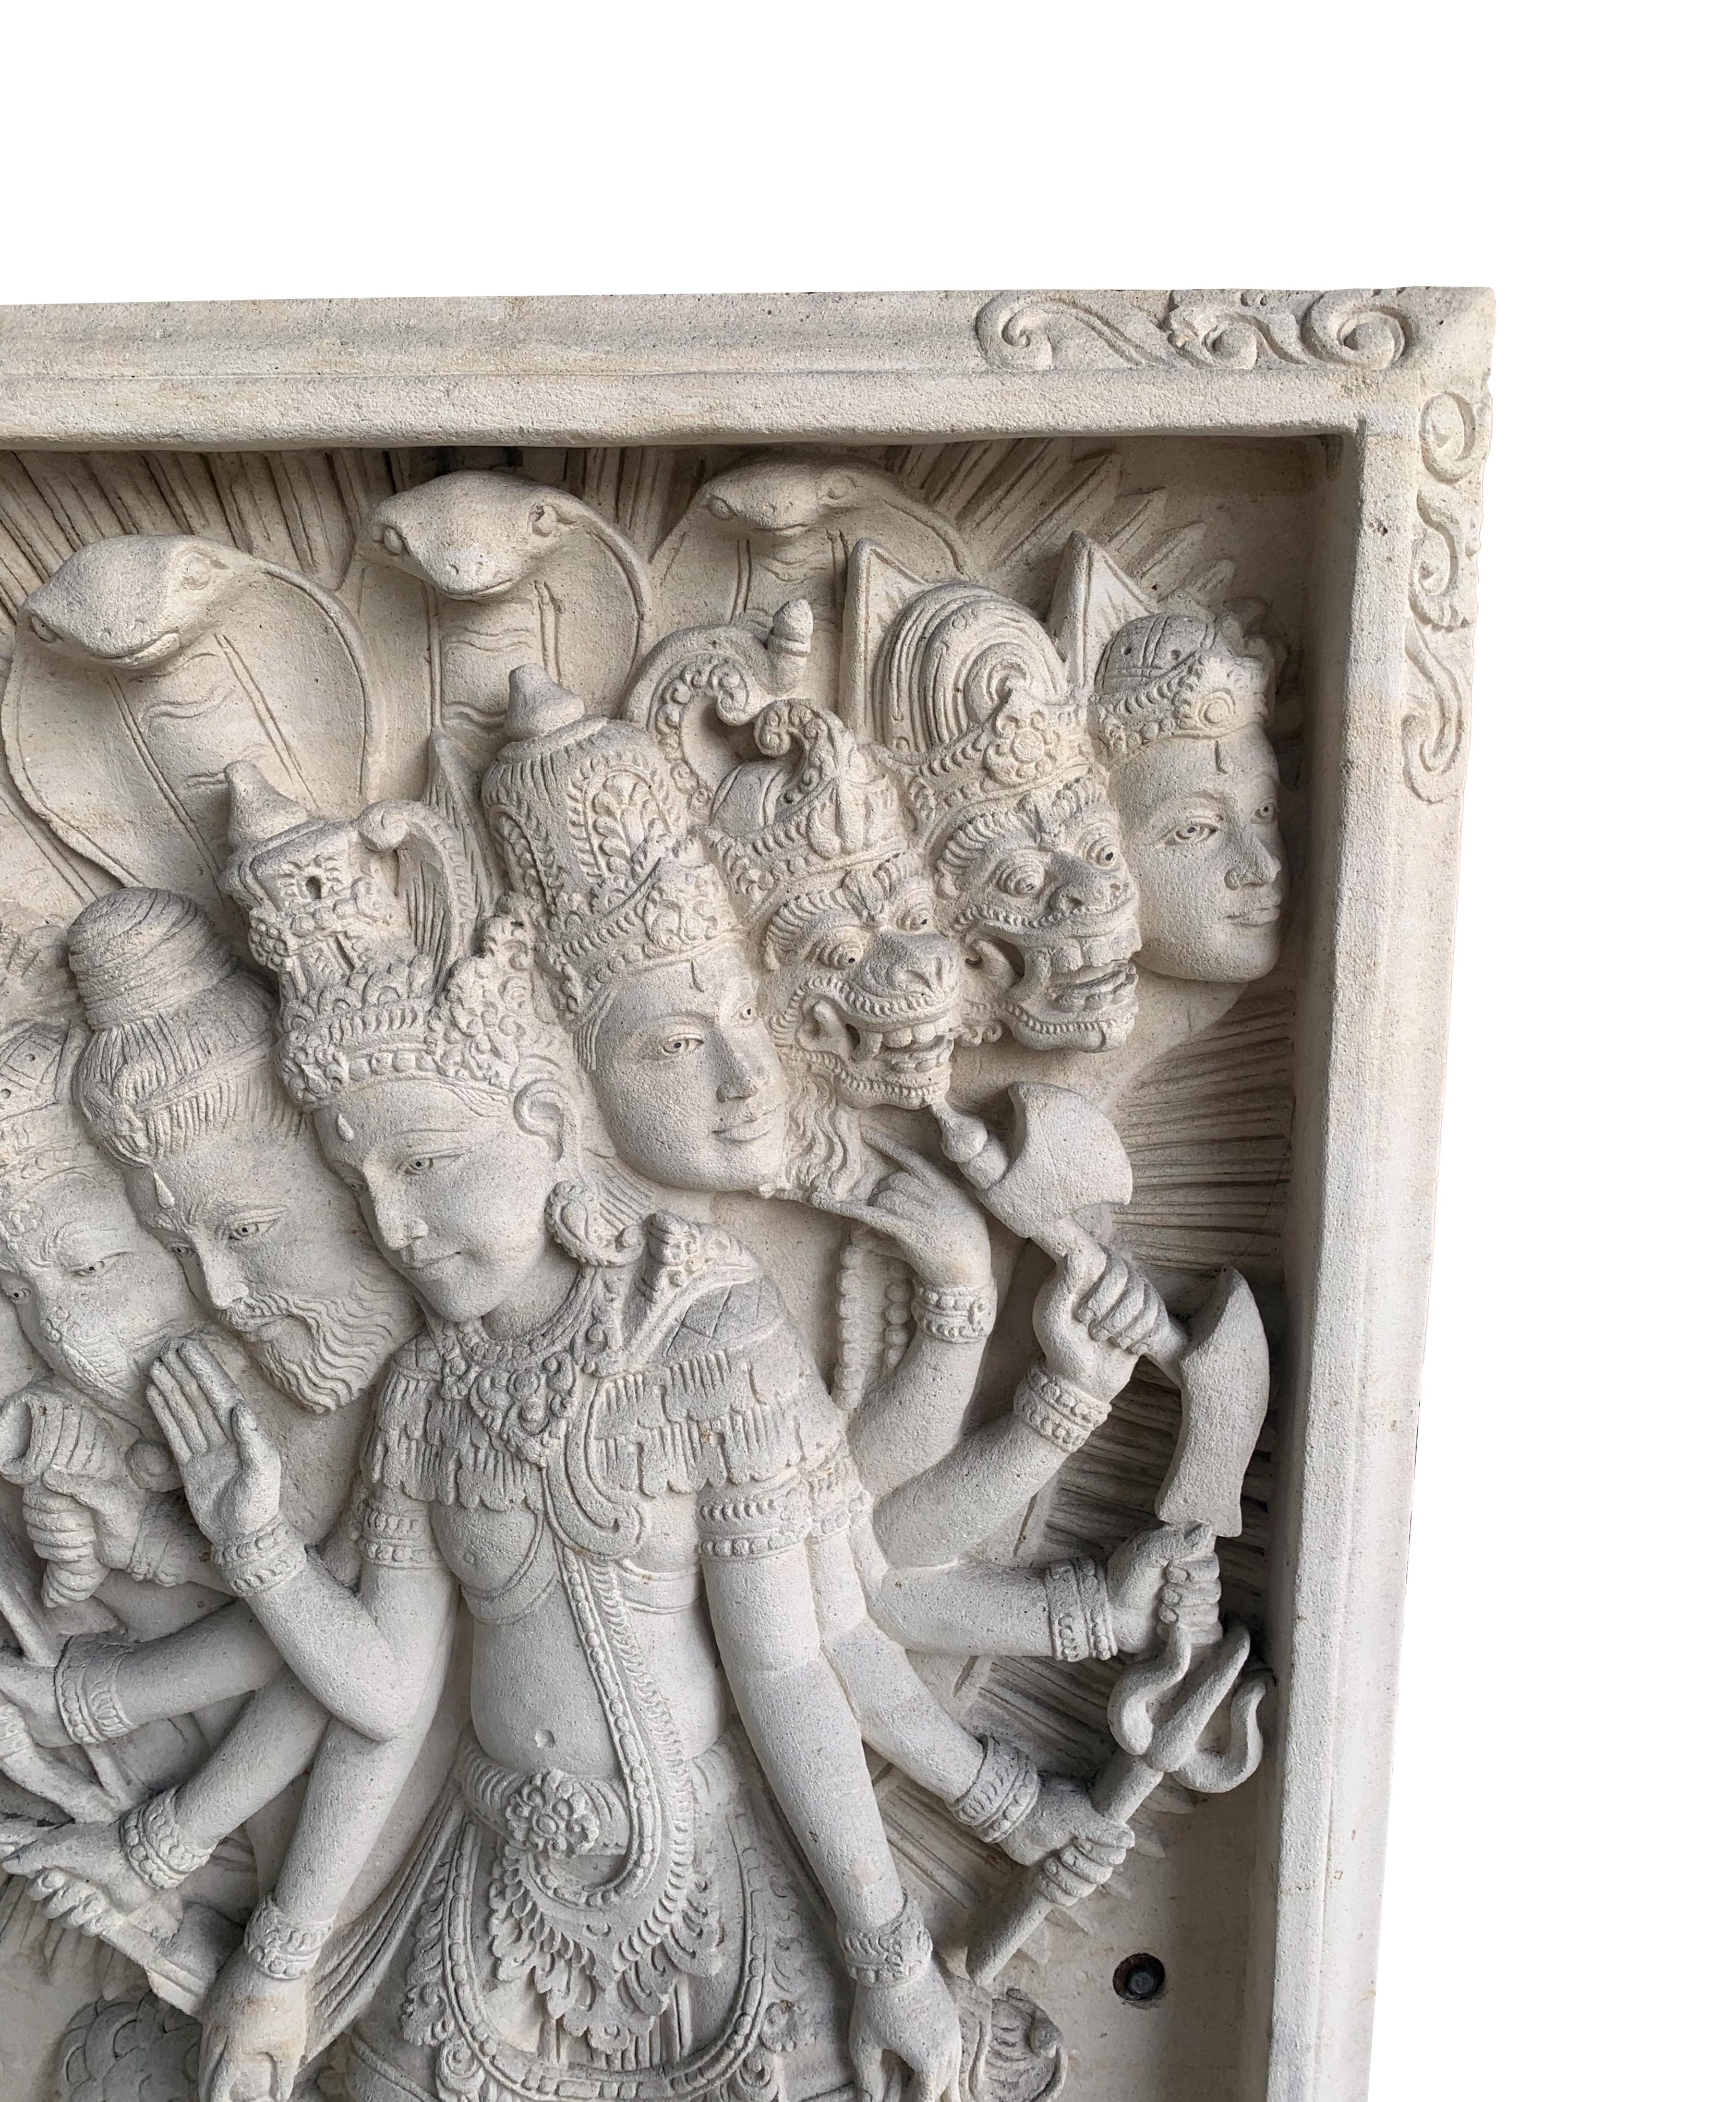 Balinese Hand-Carved Sandstone Carving with Hindu Gods from Bali